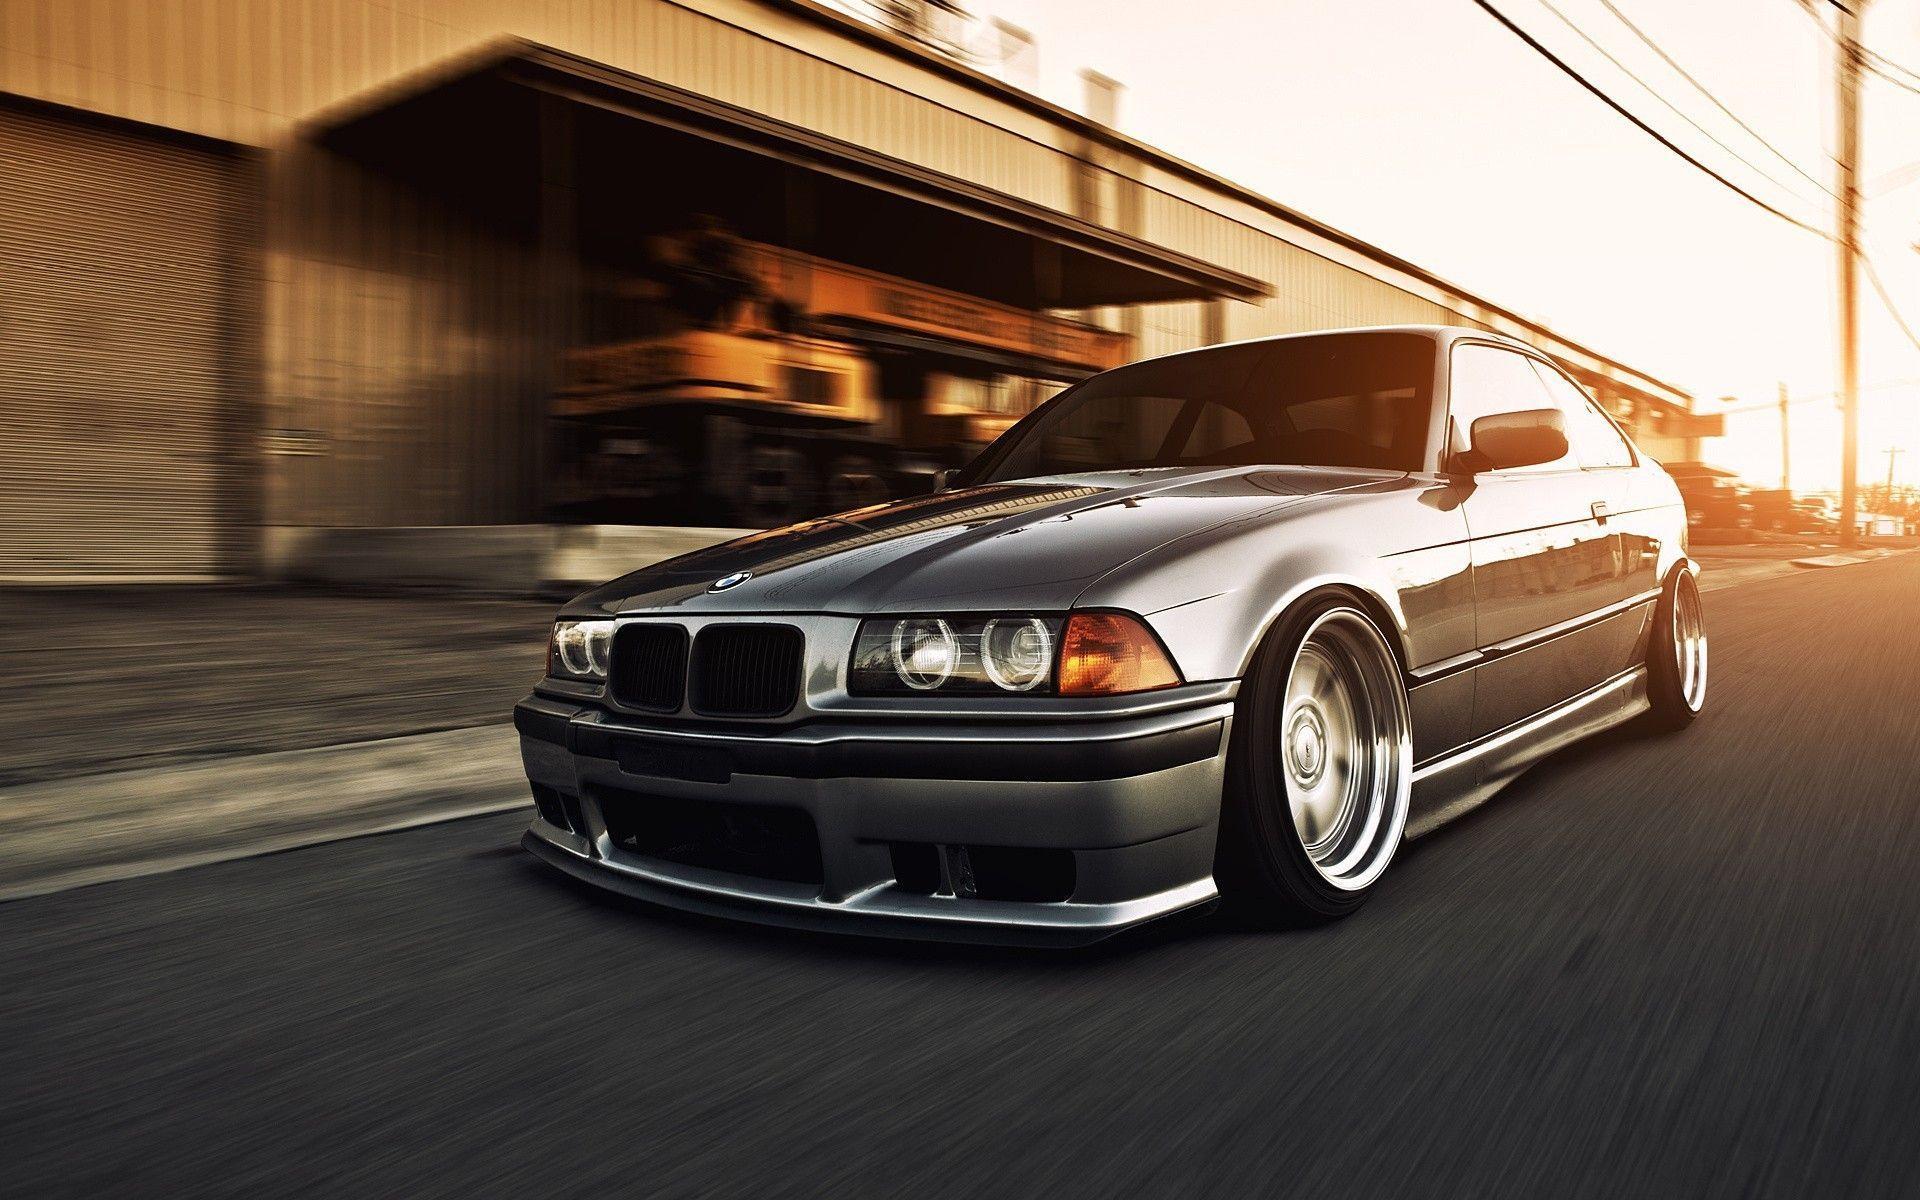 BMW M3 E36 - Design, Power, and Unmatched Handling